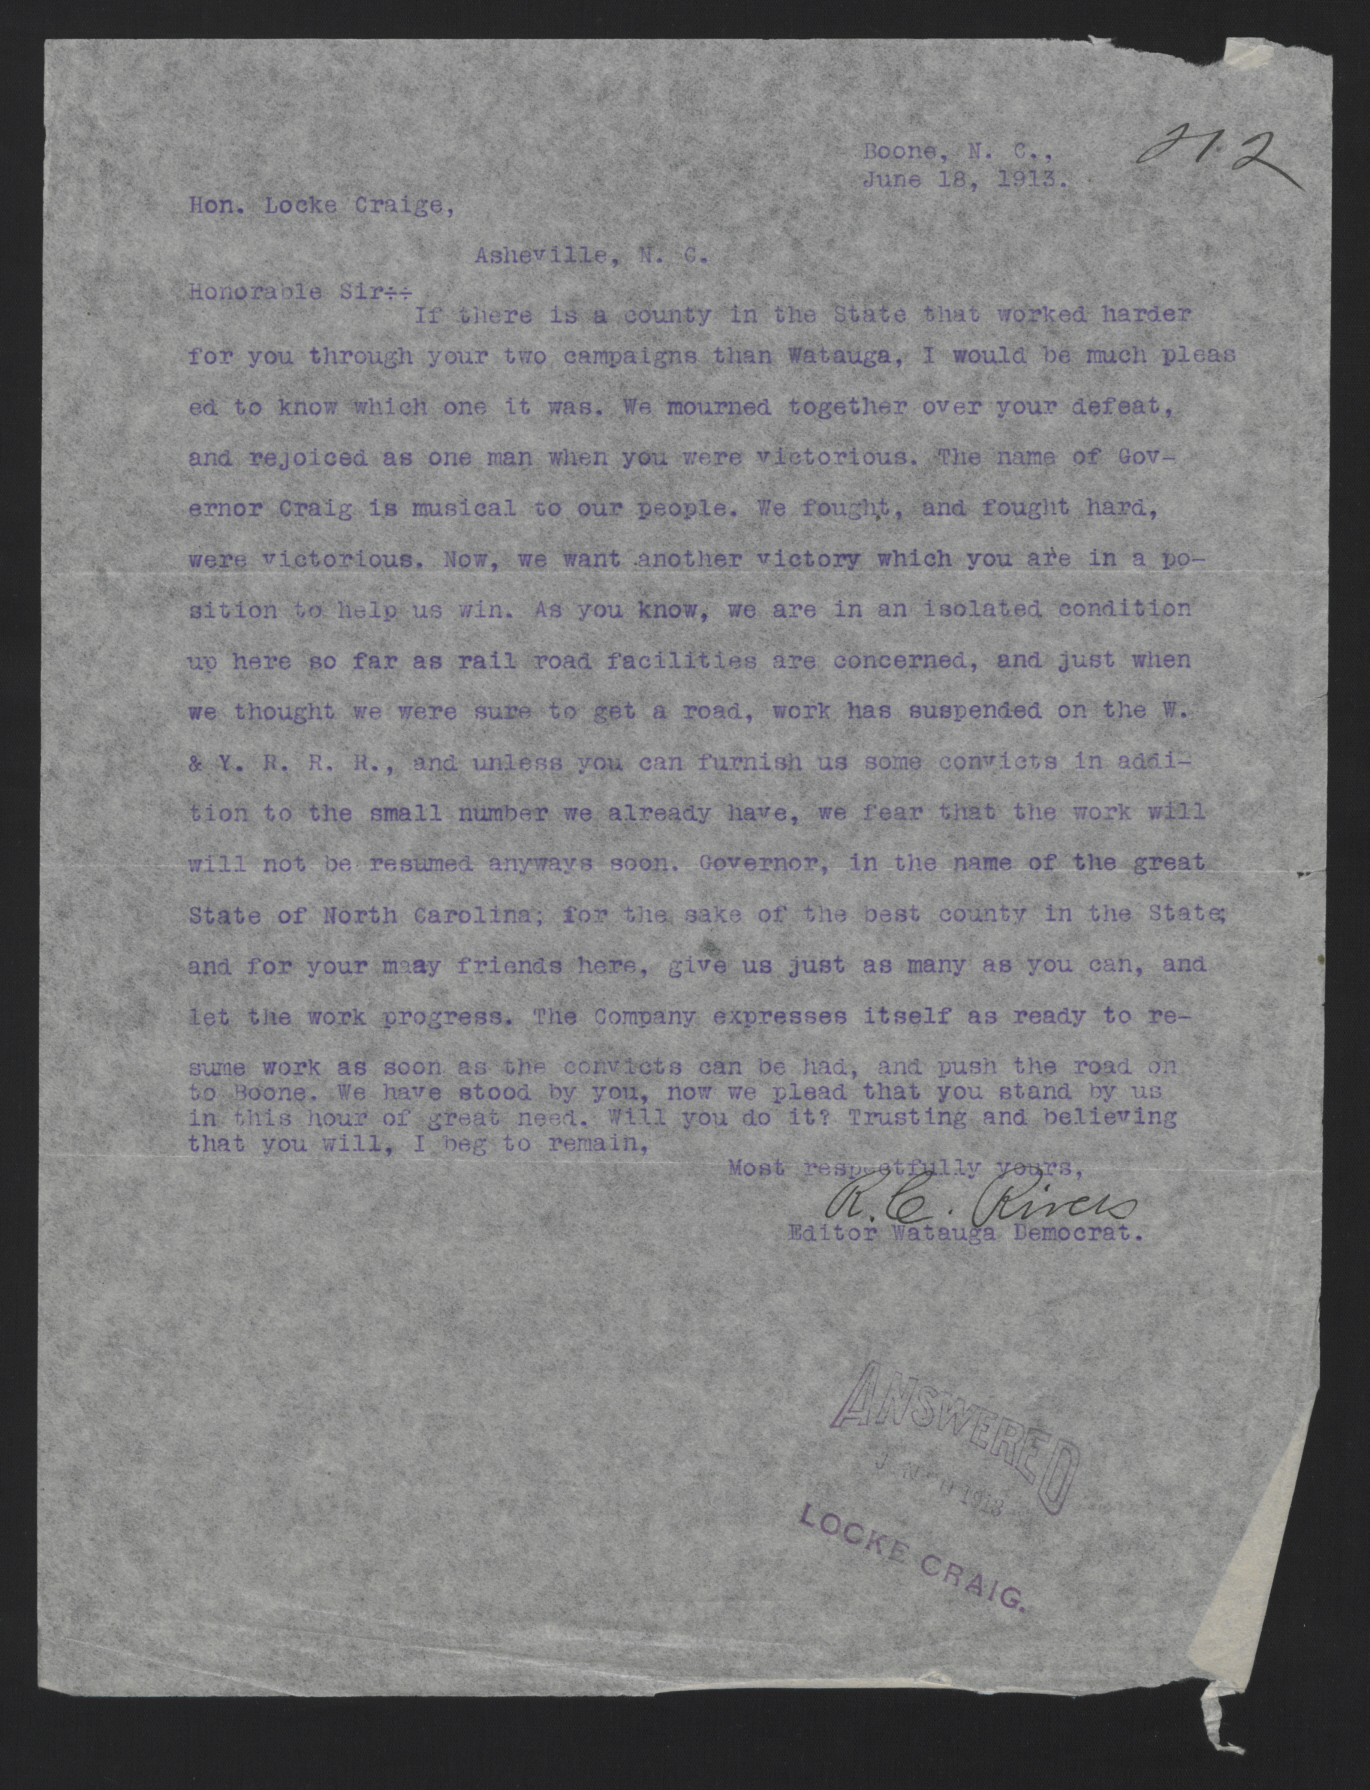 Letter from Rivers to Craig, June 18, 1913